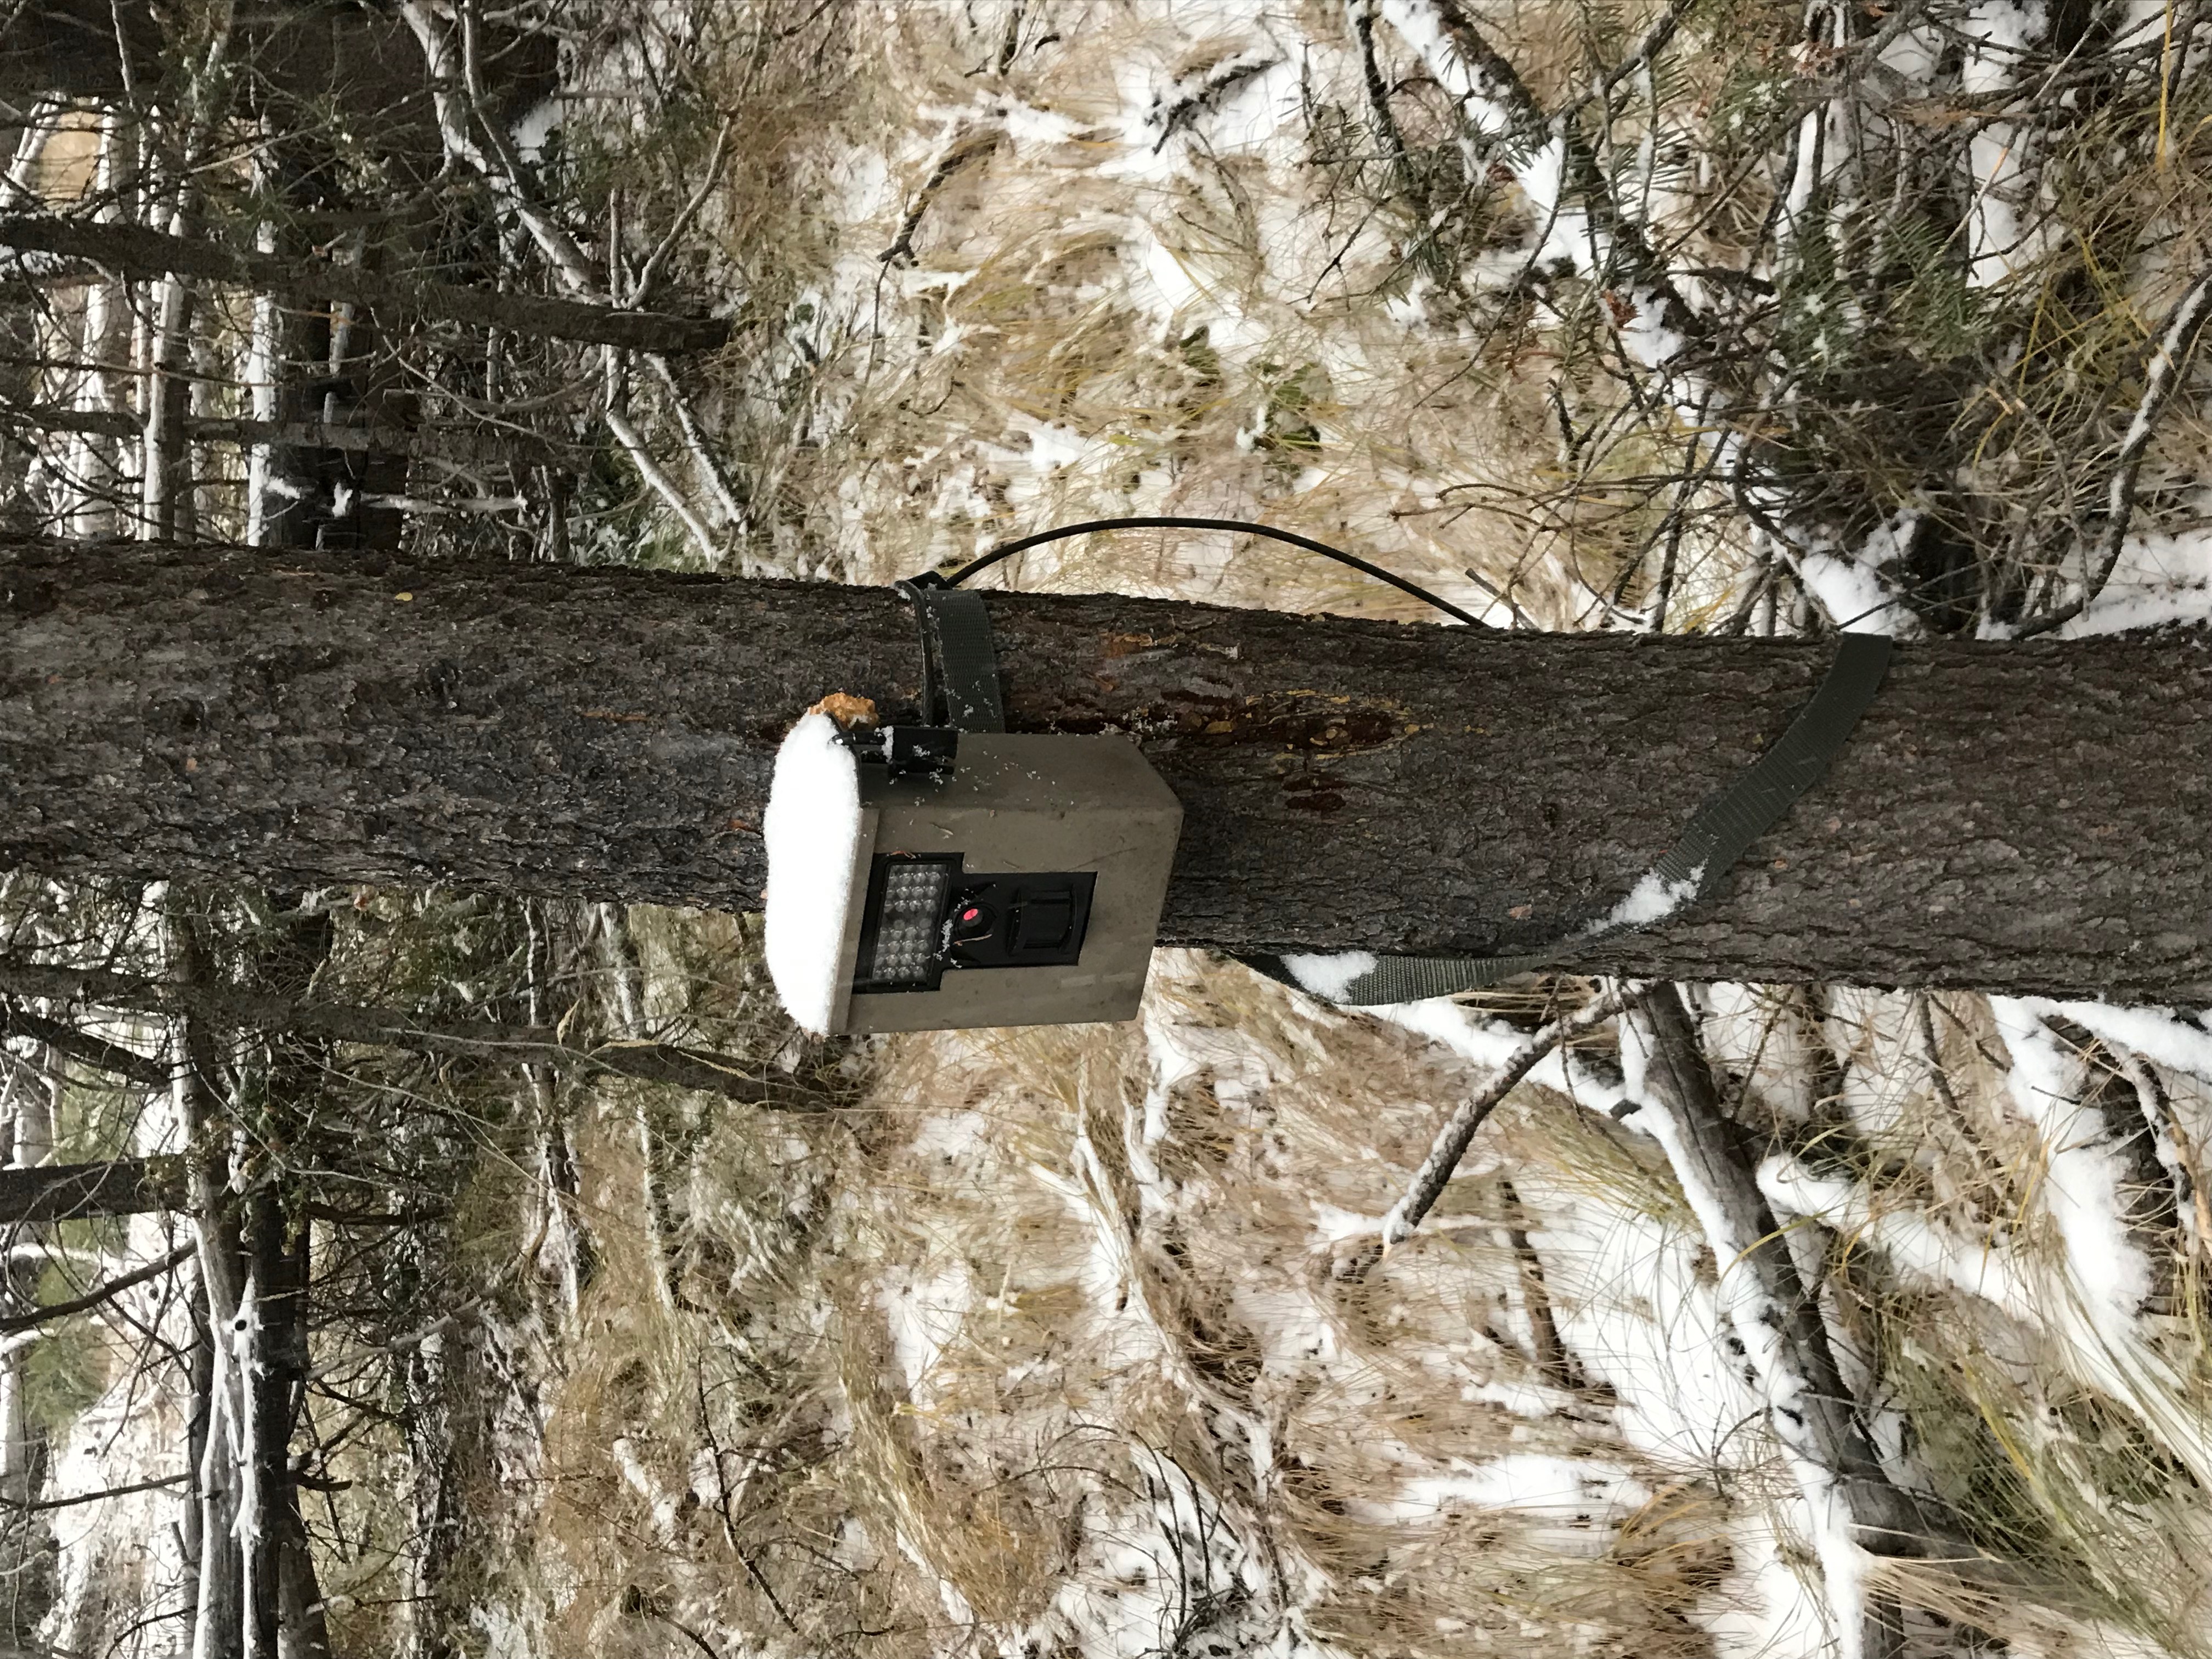 A wildlife camera deployed on a tree, topped with snow